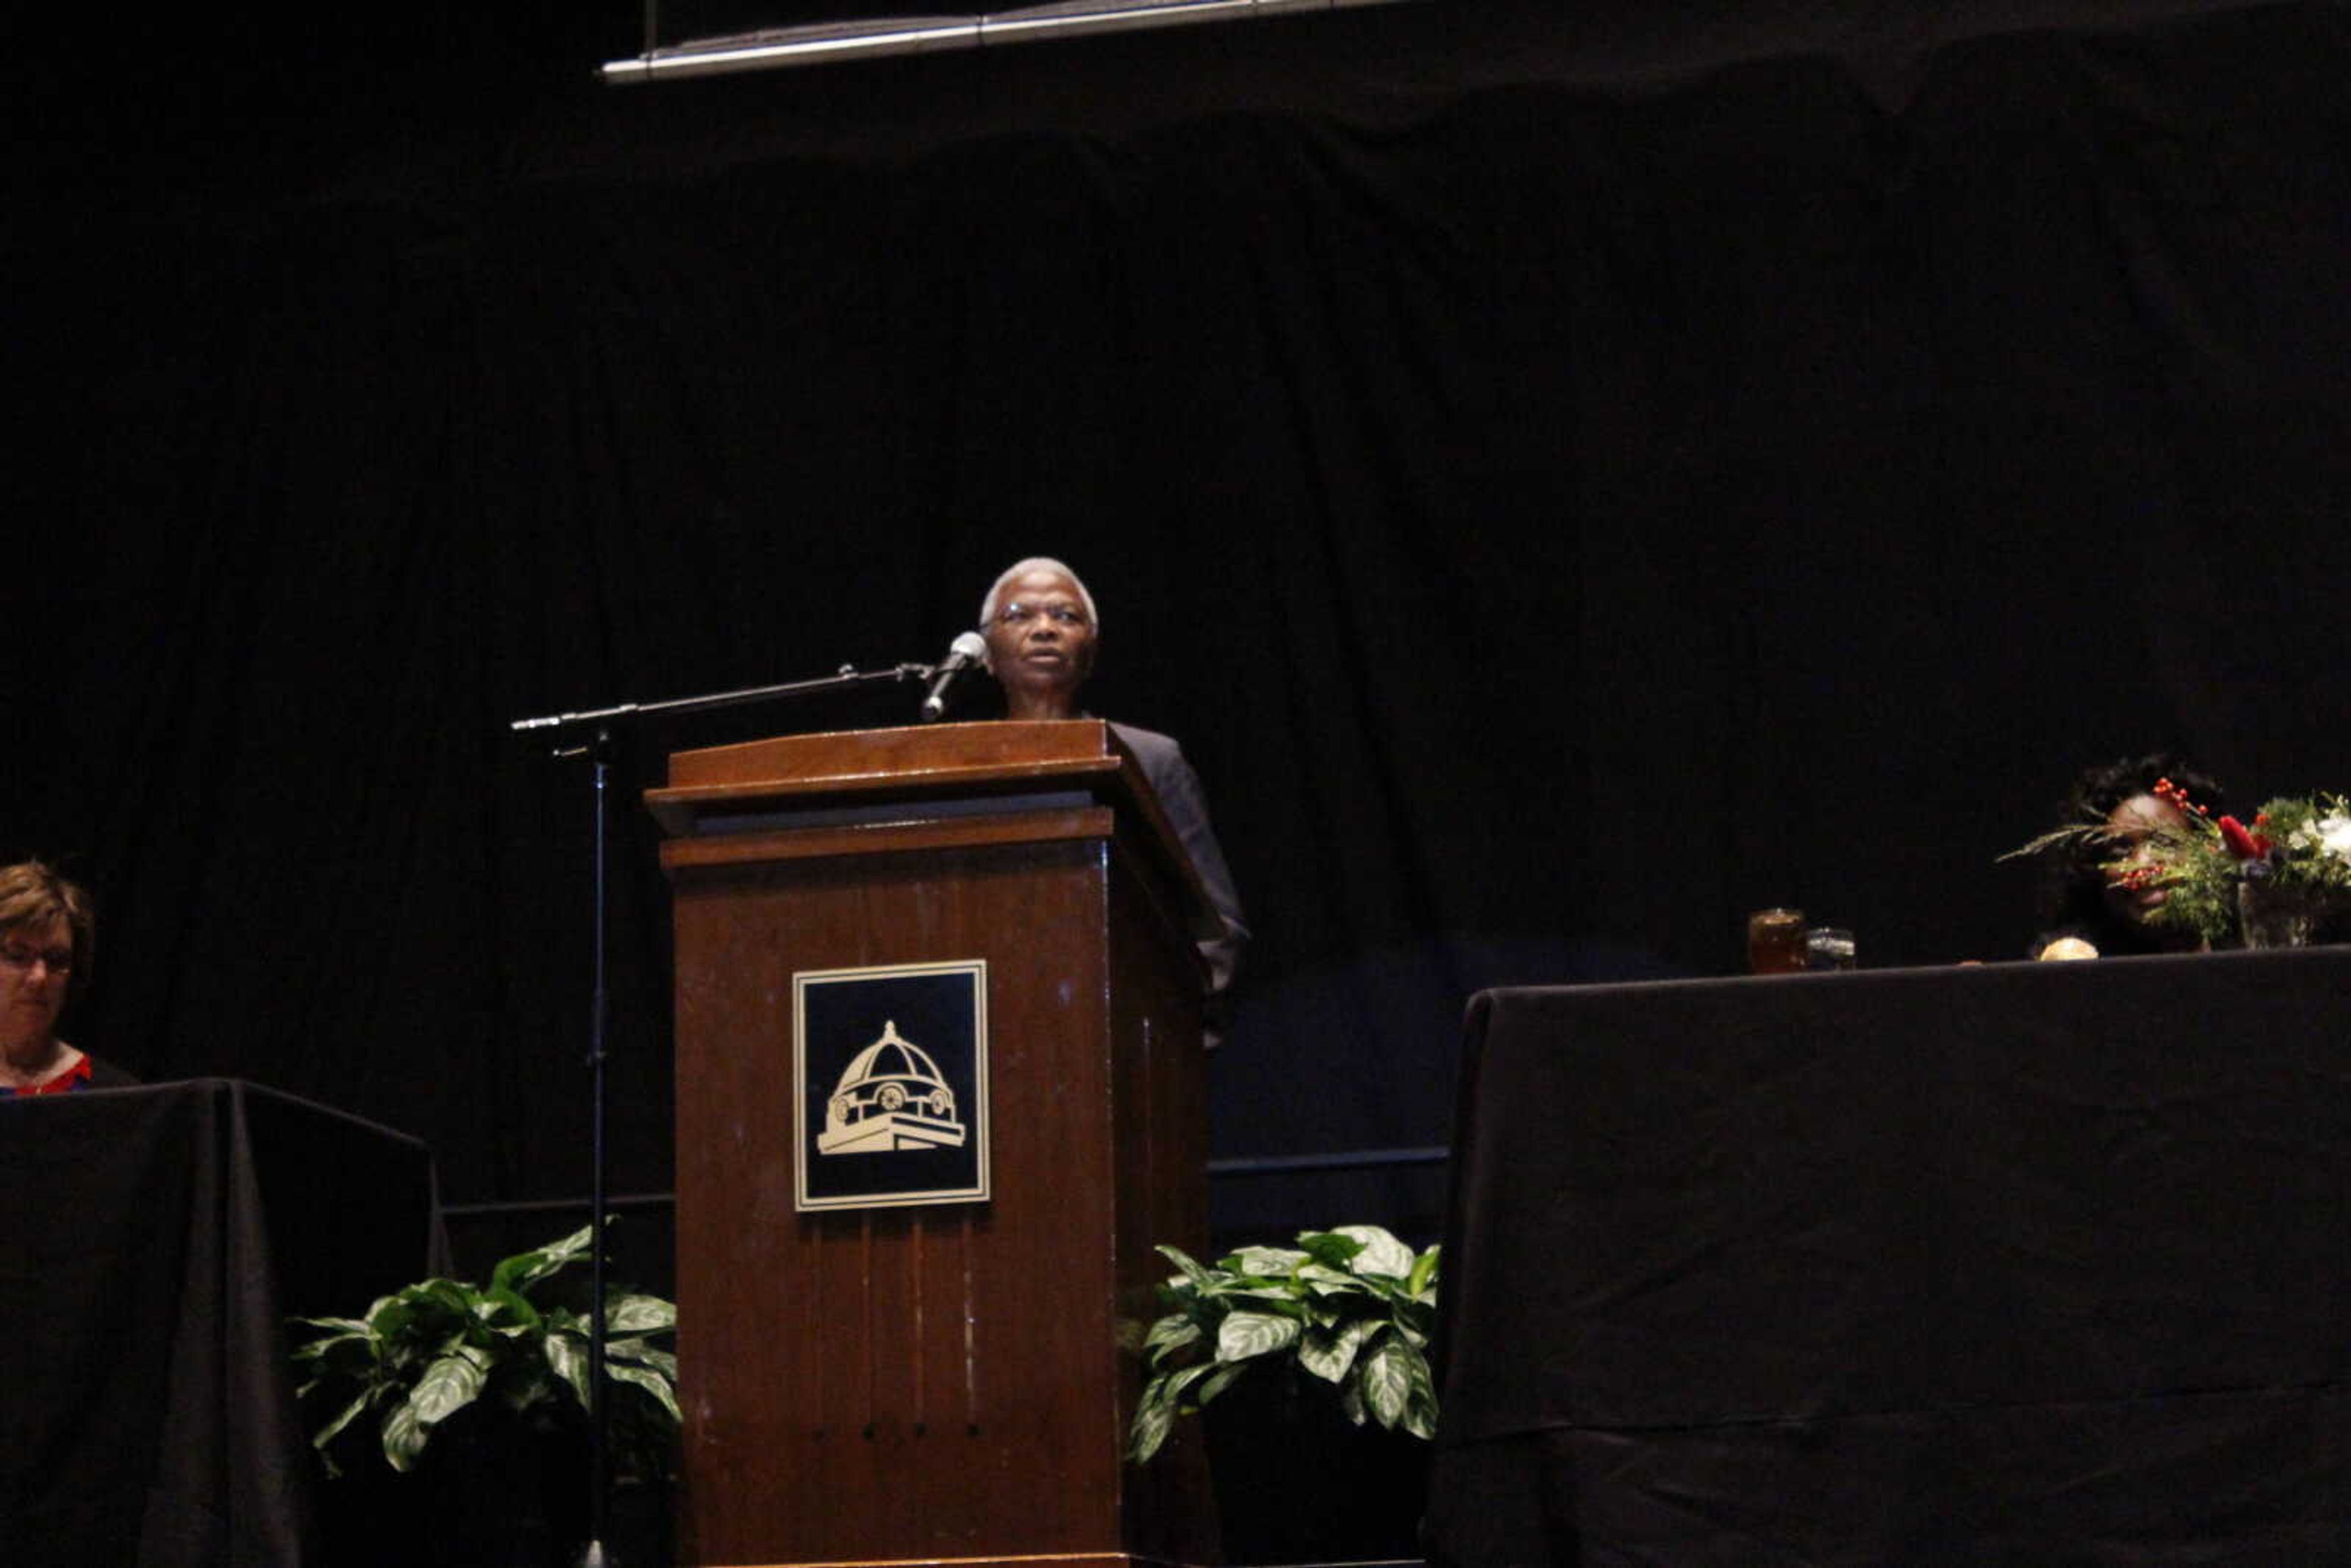  Berry Speaks about diversity at annual Dr. Martin Luther King, Jr. Celebration Dinner.